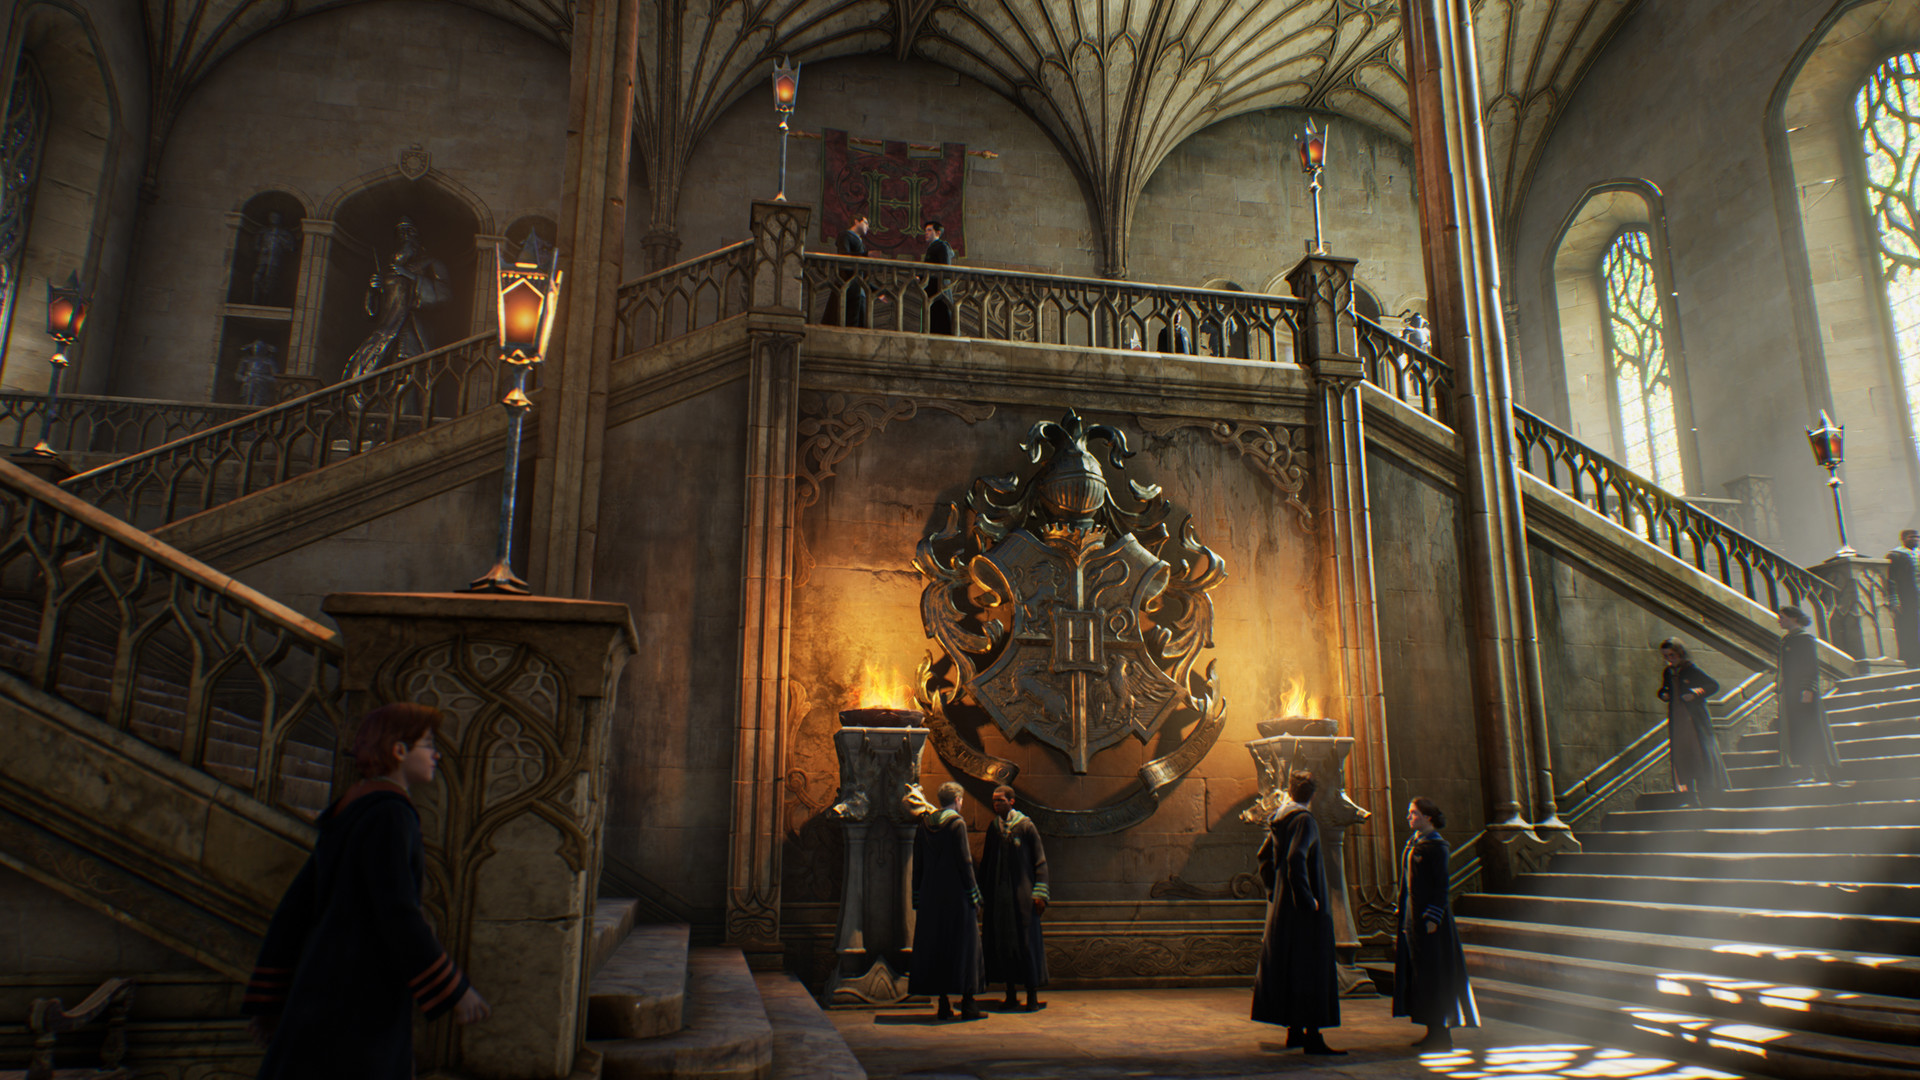 Hogwarts Legacy early access start and launch times